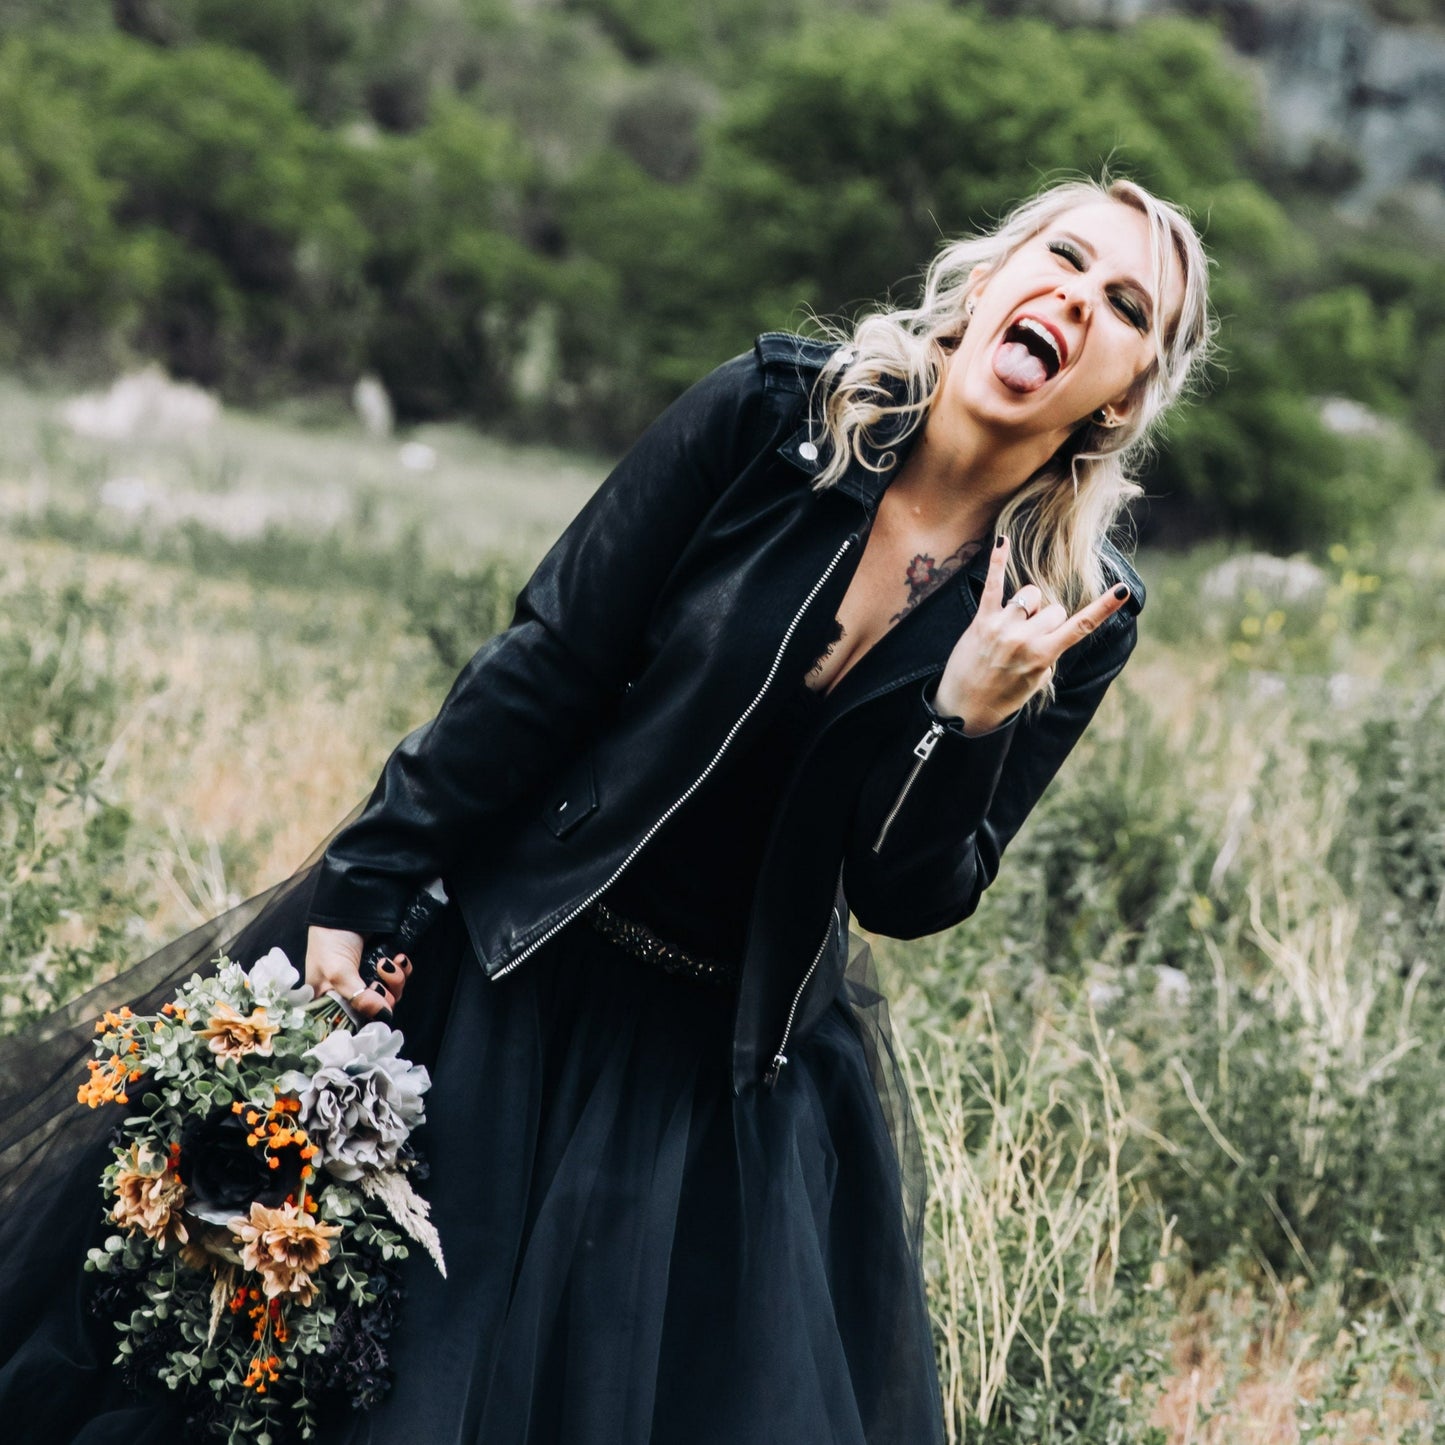 Skeleton Pinky Promise Bridal Cover-Up in black leather – a stylish and edgy addition to your wedding ensemble